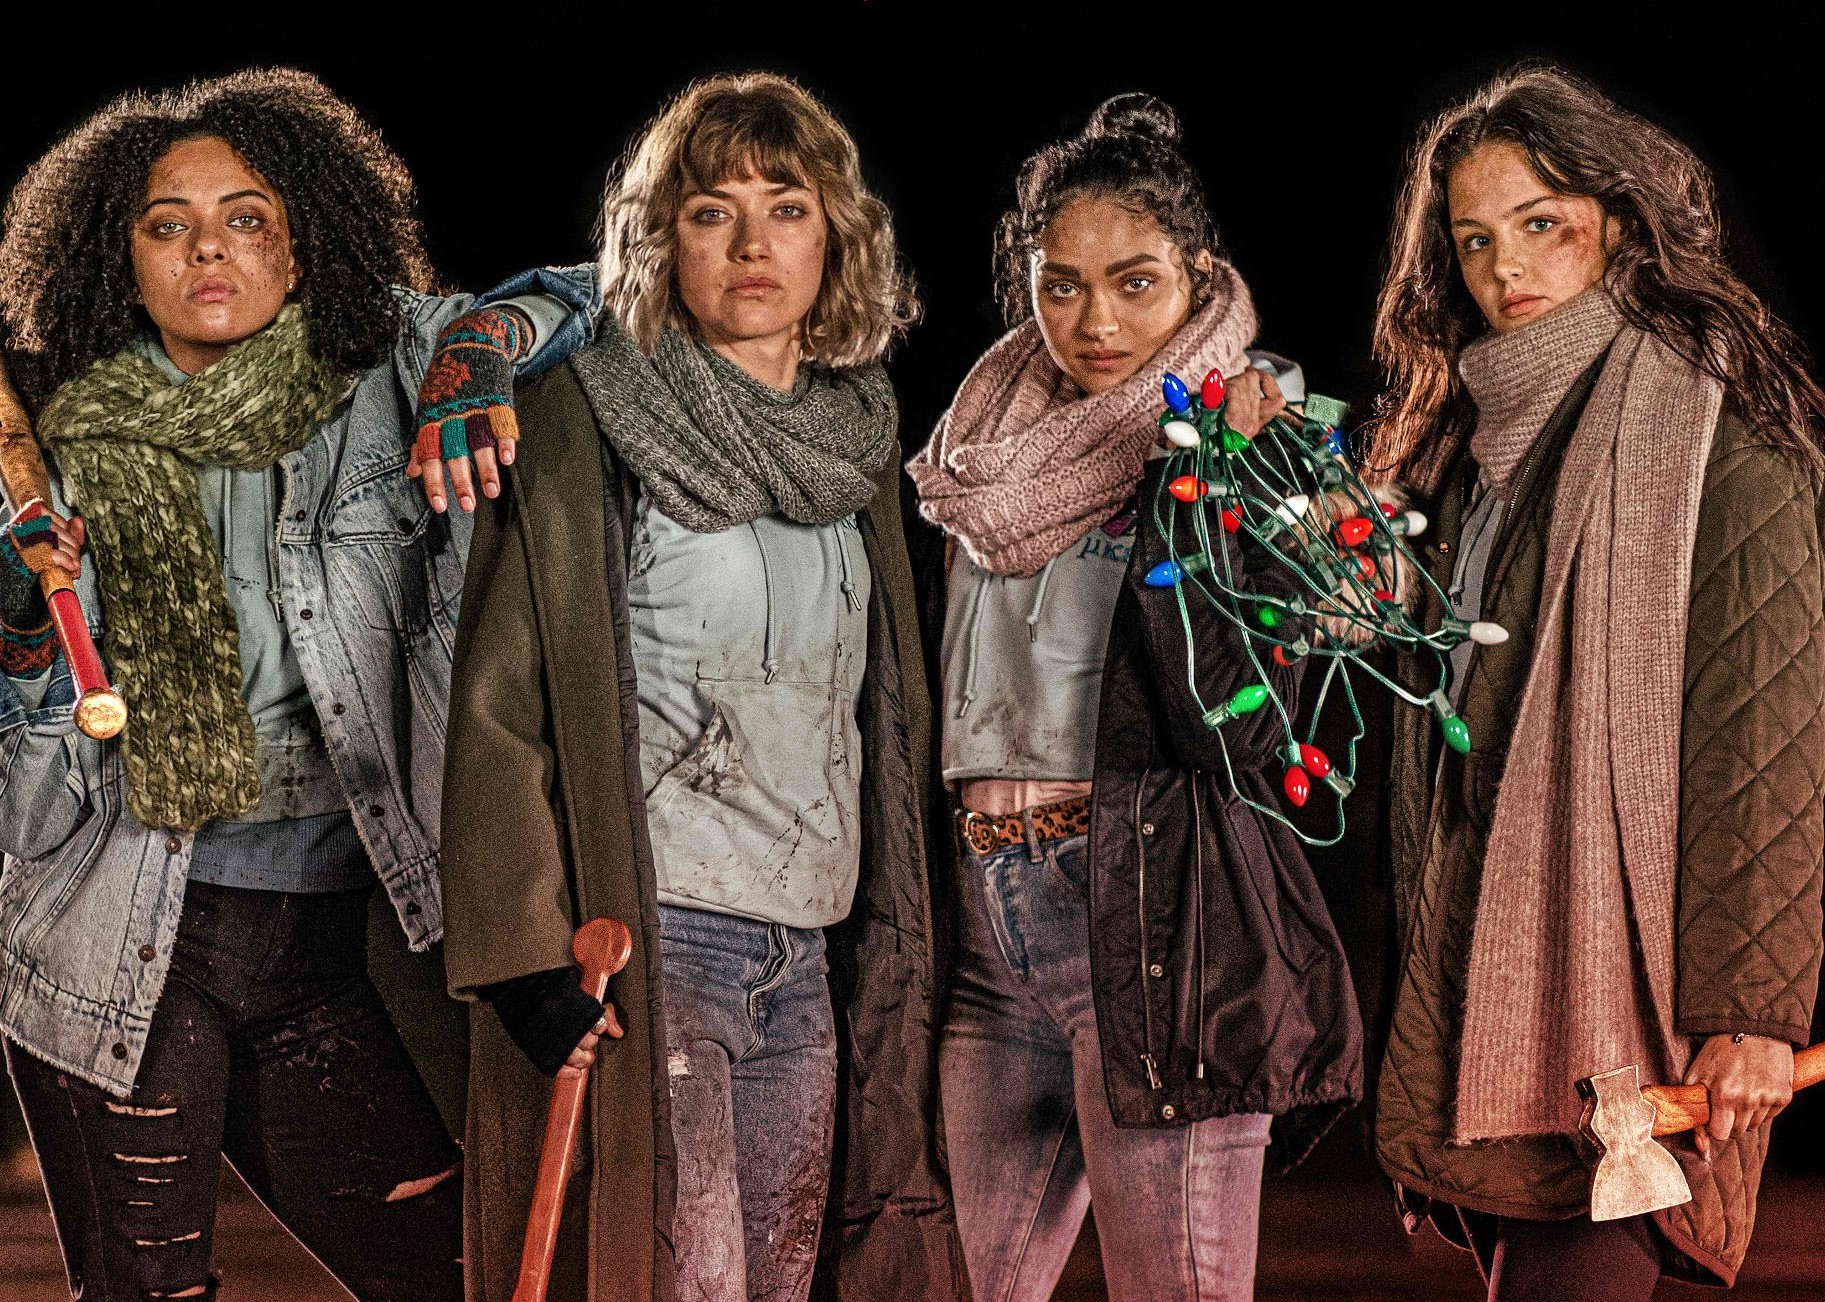 Meet the cast of this year’s holiday horror thriller ‘Black Christmas’